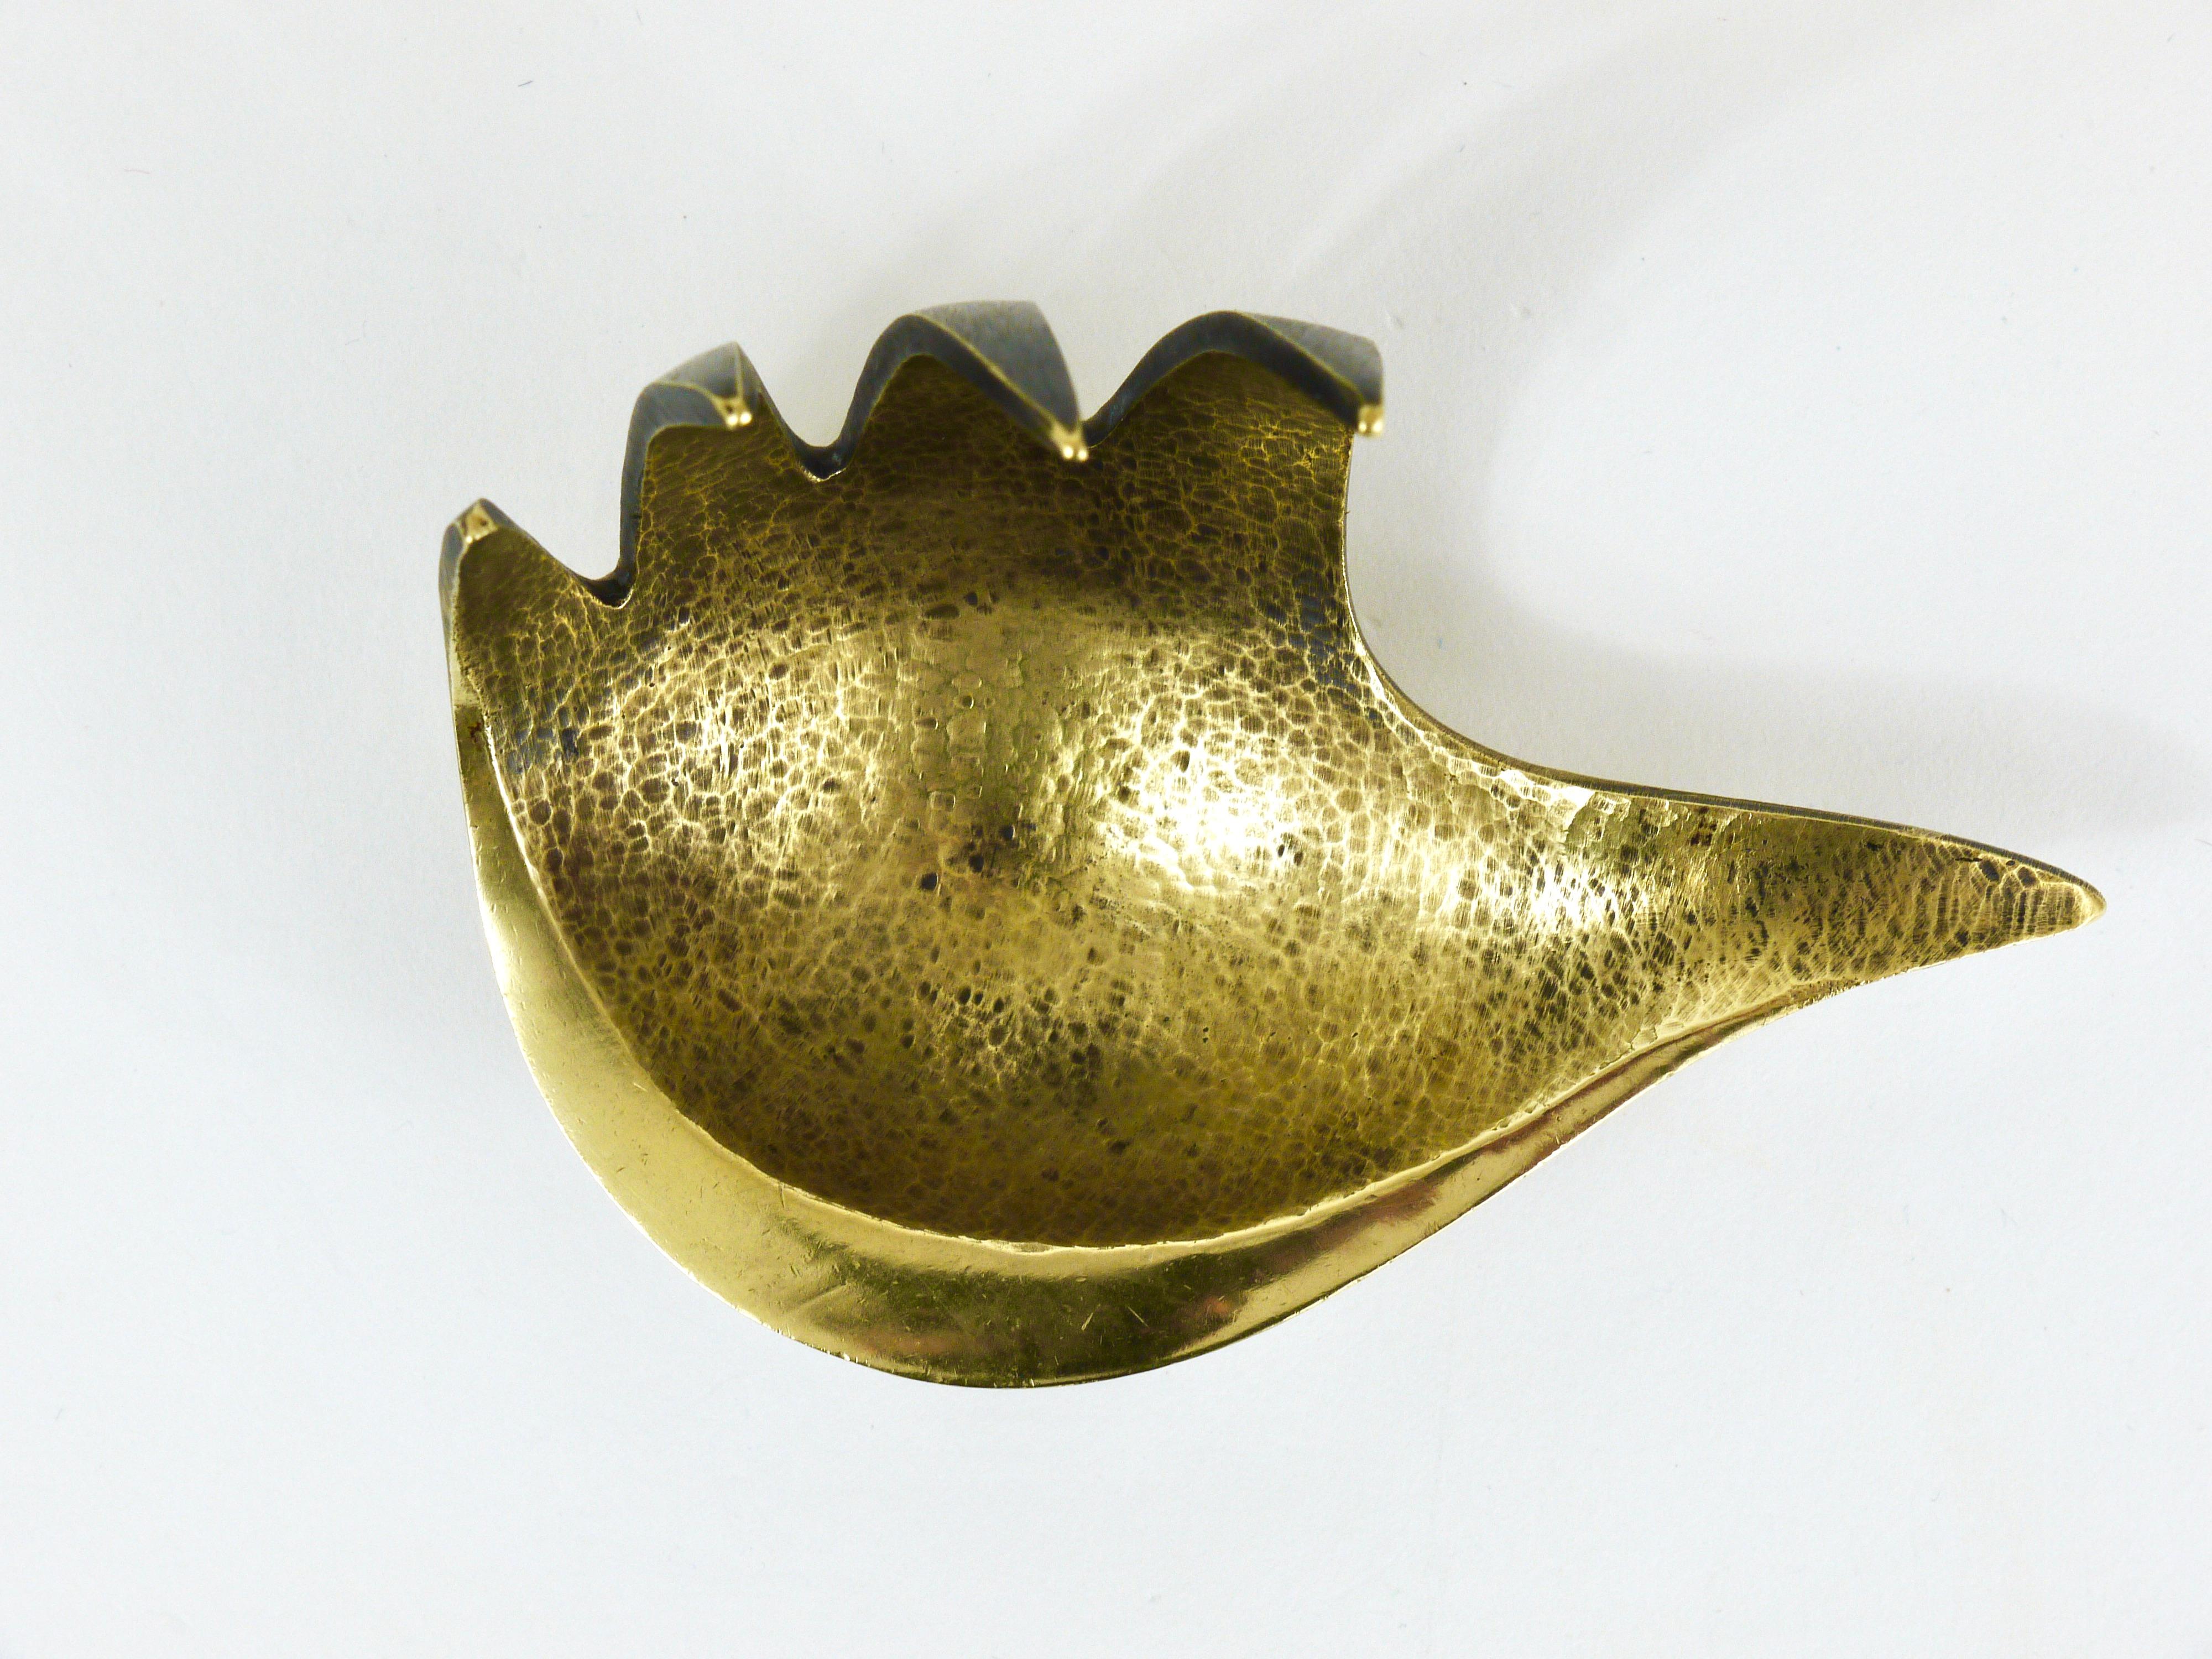 A beautiful modernist ashtray in the shape of a hand. A humorous design by Walter Bosse, executed by Baller Austria in the 1950s. Also suitable as a jewelry and ring holder. Made of brass, in very good condition with nice patina.